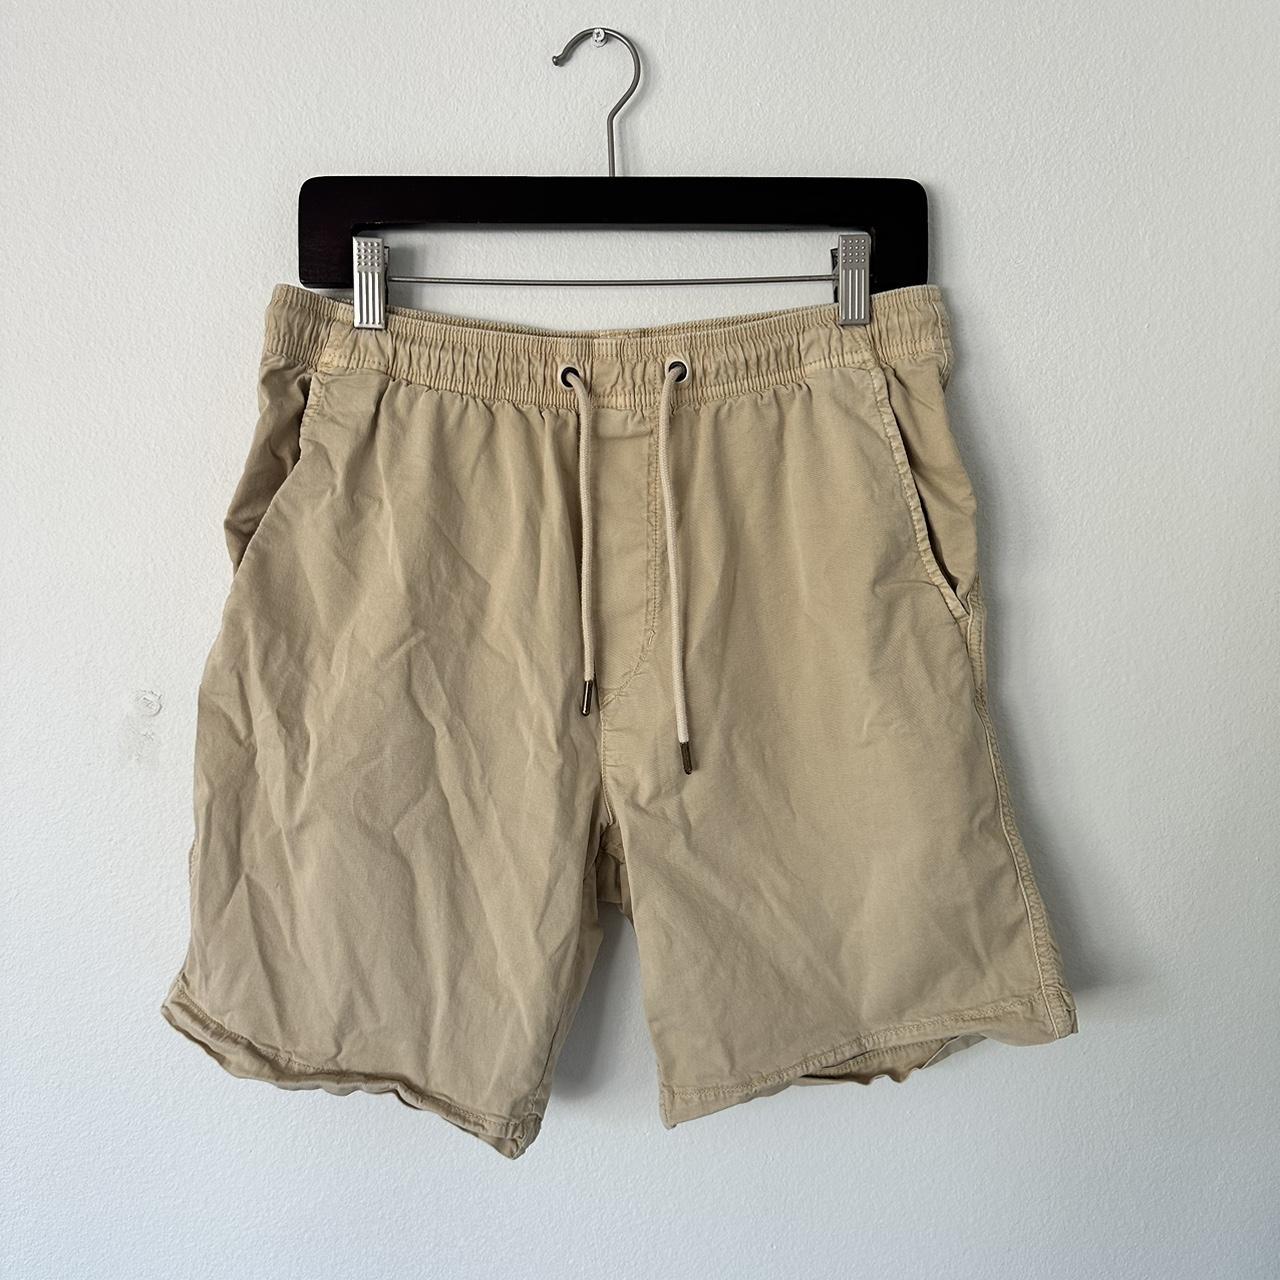 Men’s American Eagle Kakhi Shorts. Small but they... - Depop